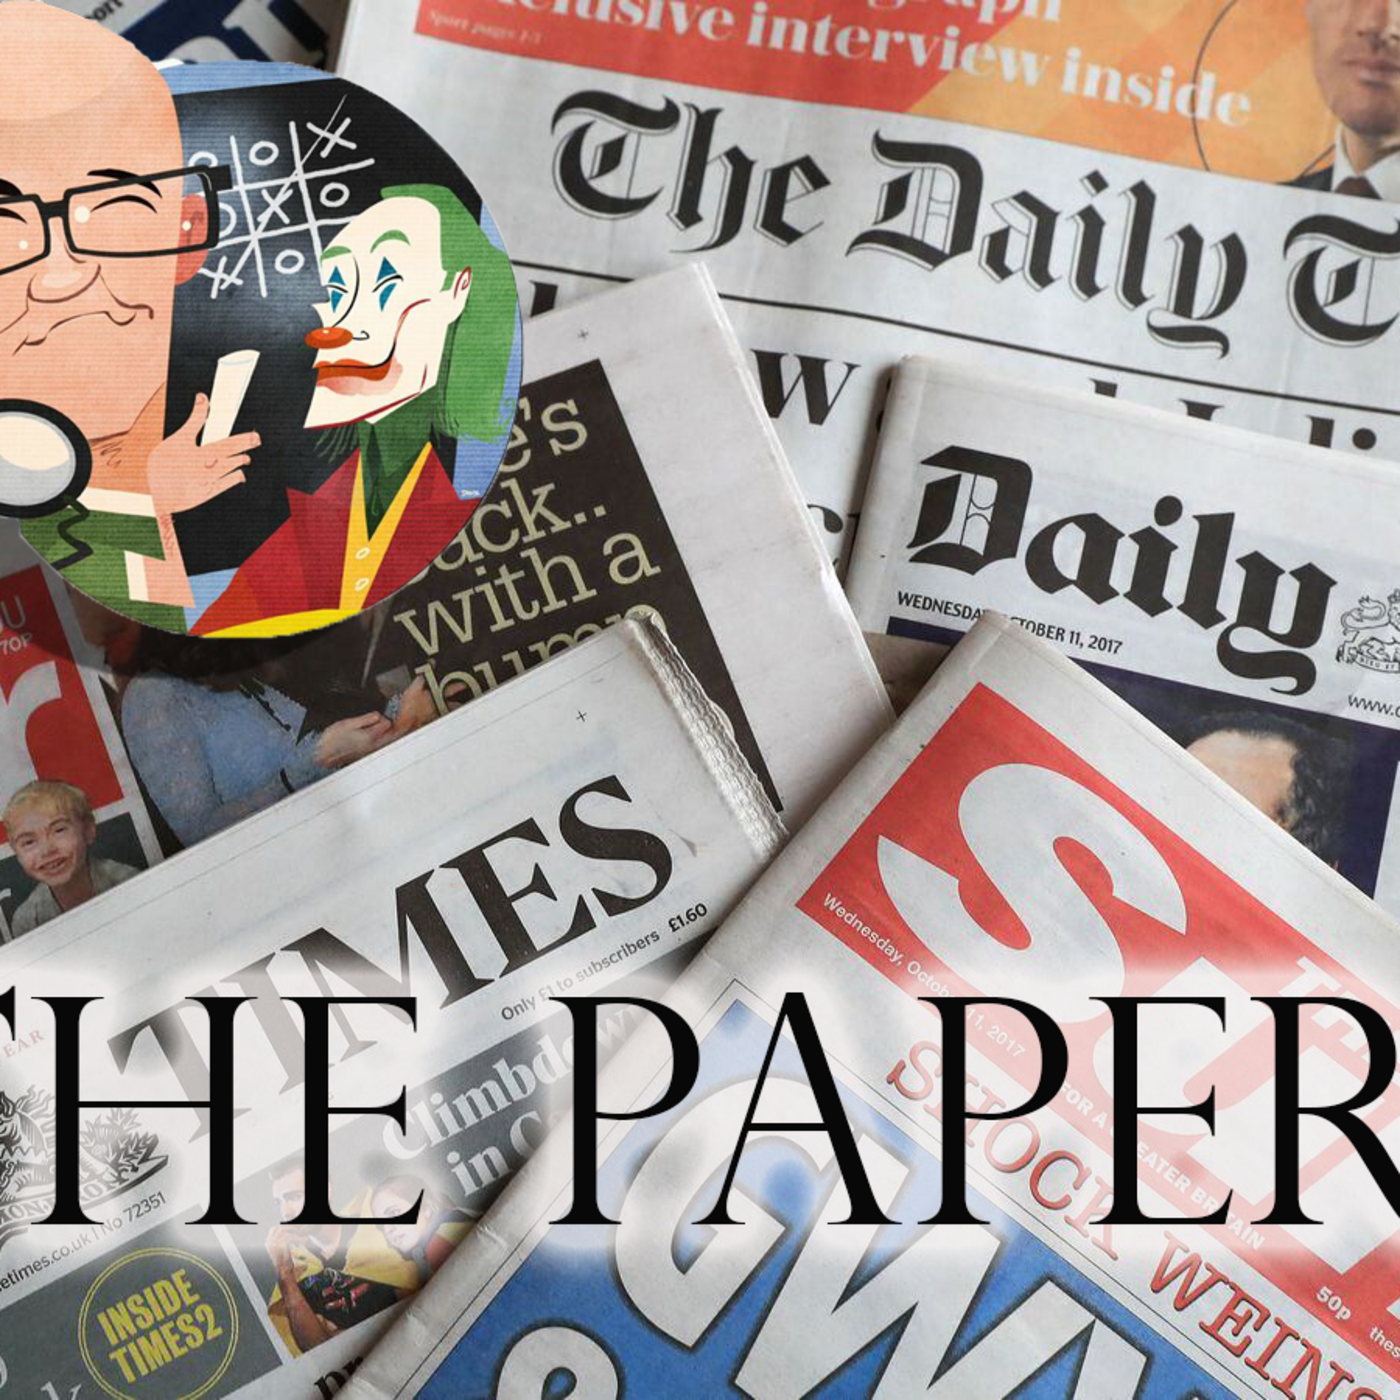 Episode 1690: The Papers - Wednesday November 29th 2023